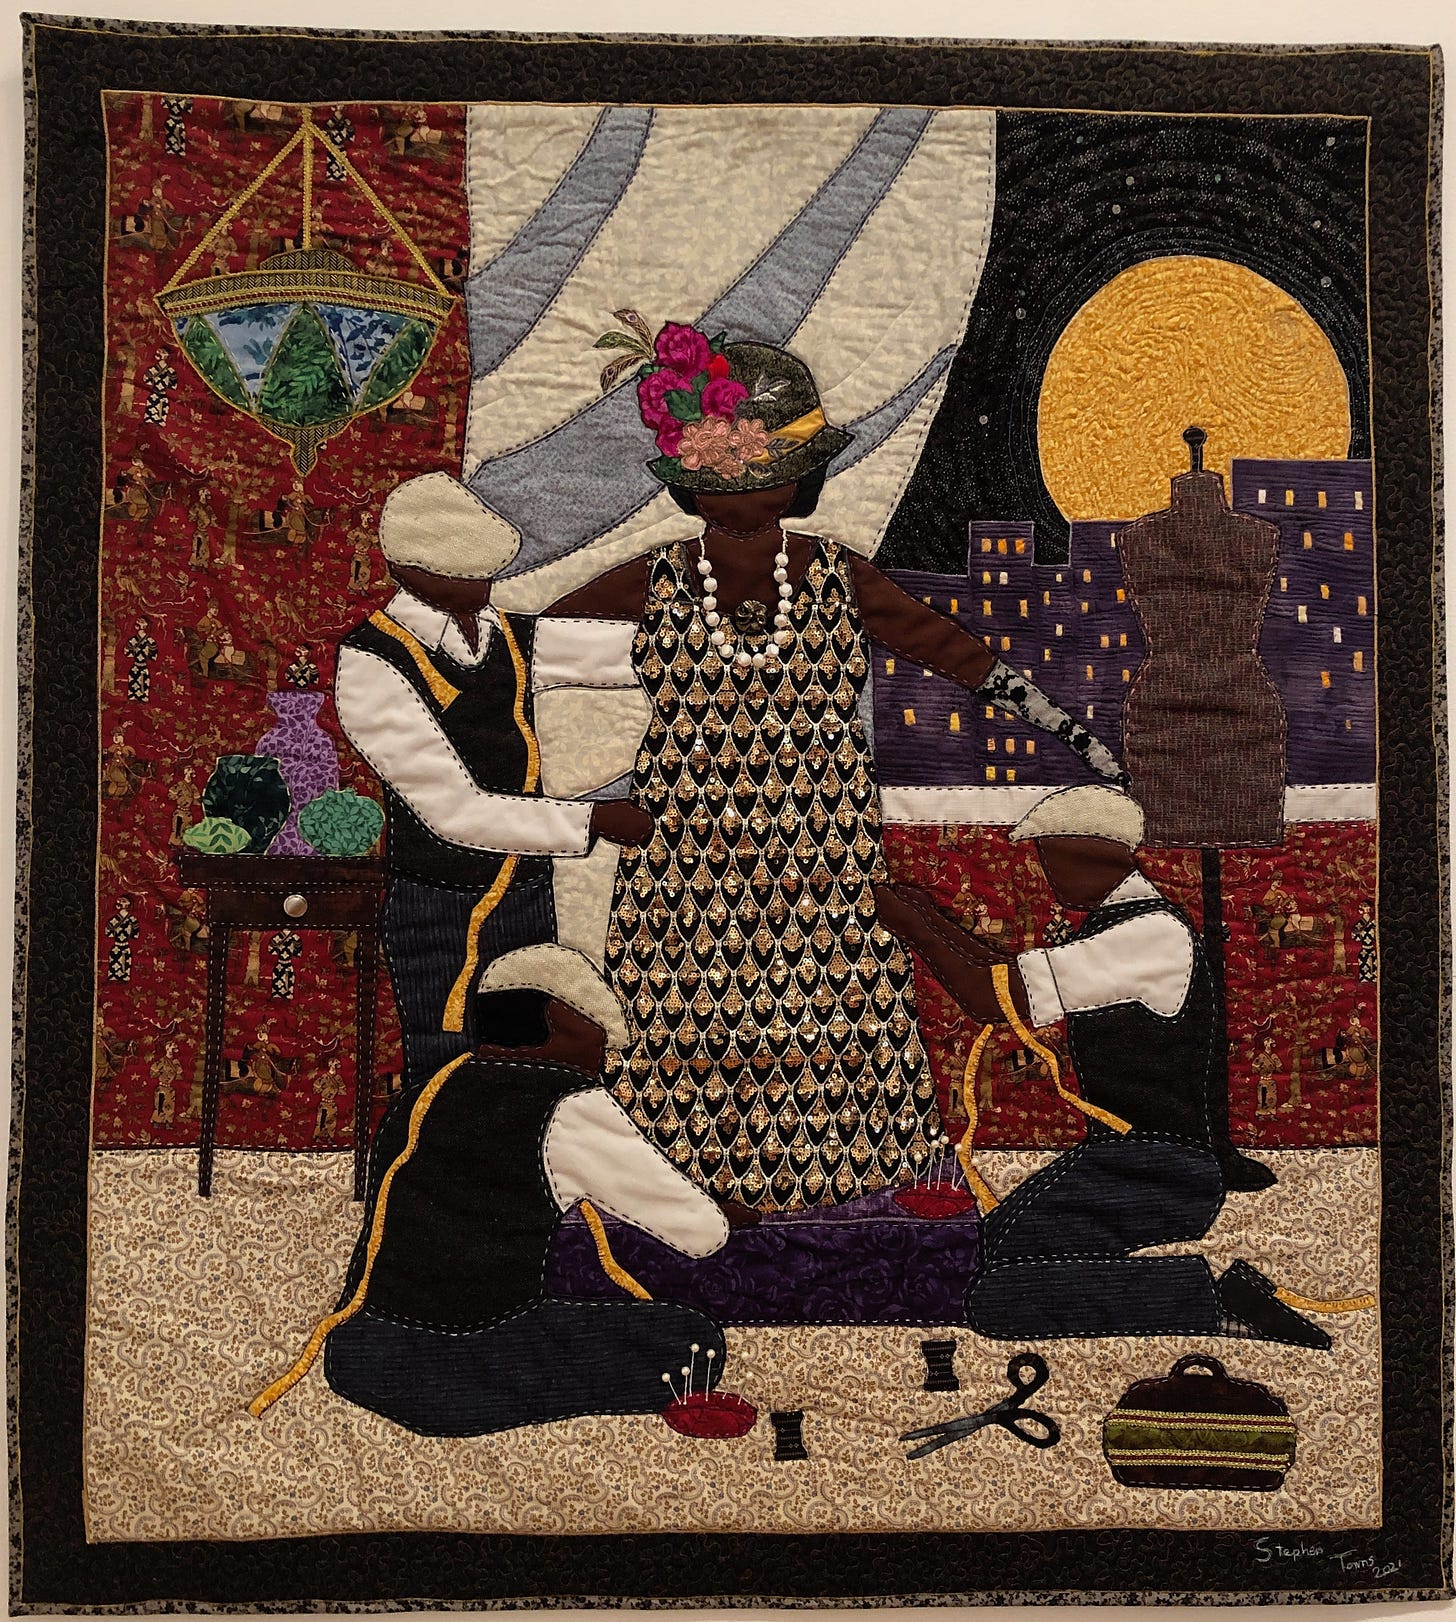 Quilt showing an African American woman at a dress fitting, attended by three African American men. The room contains a side-table and hanging lampshade. Skyscrapers and a yellow moon are visible through a large window.